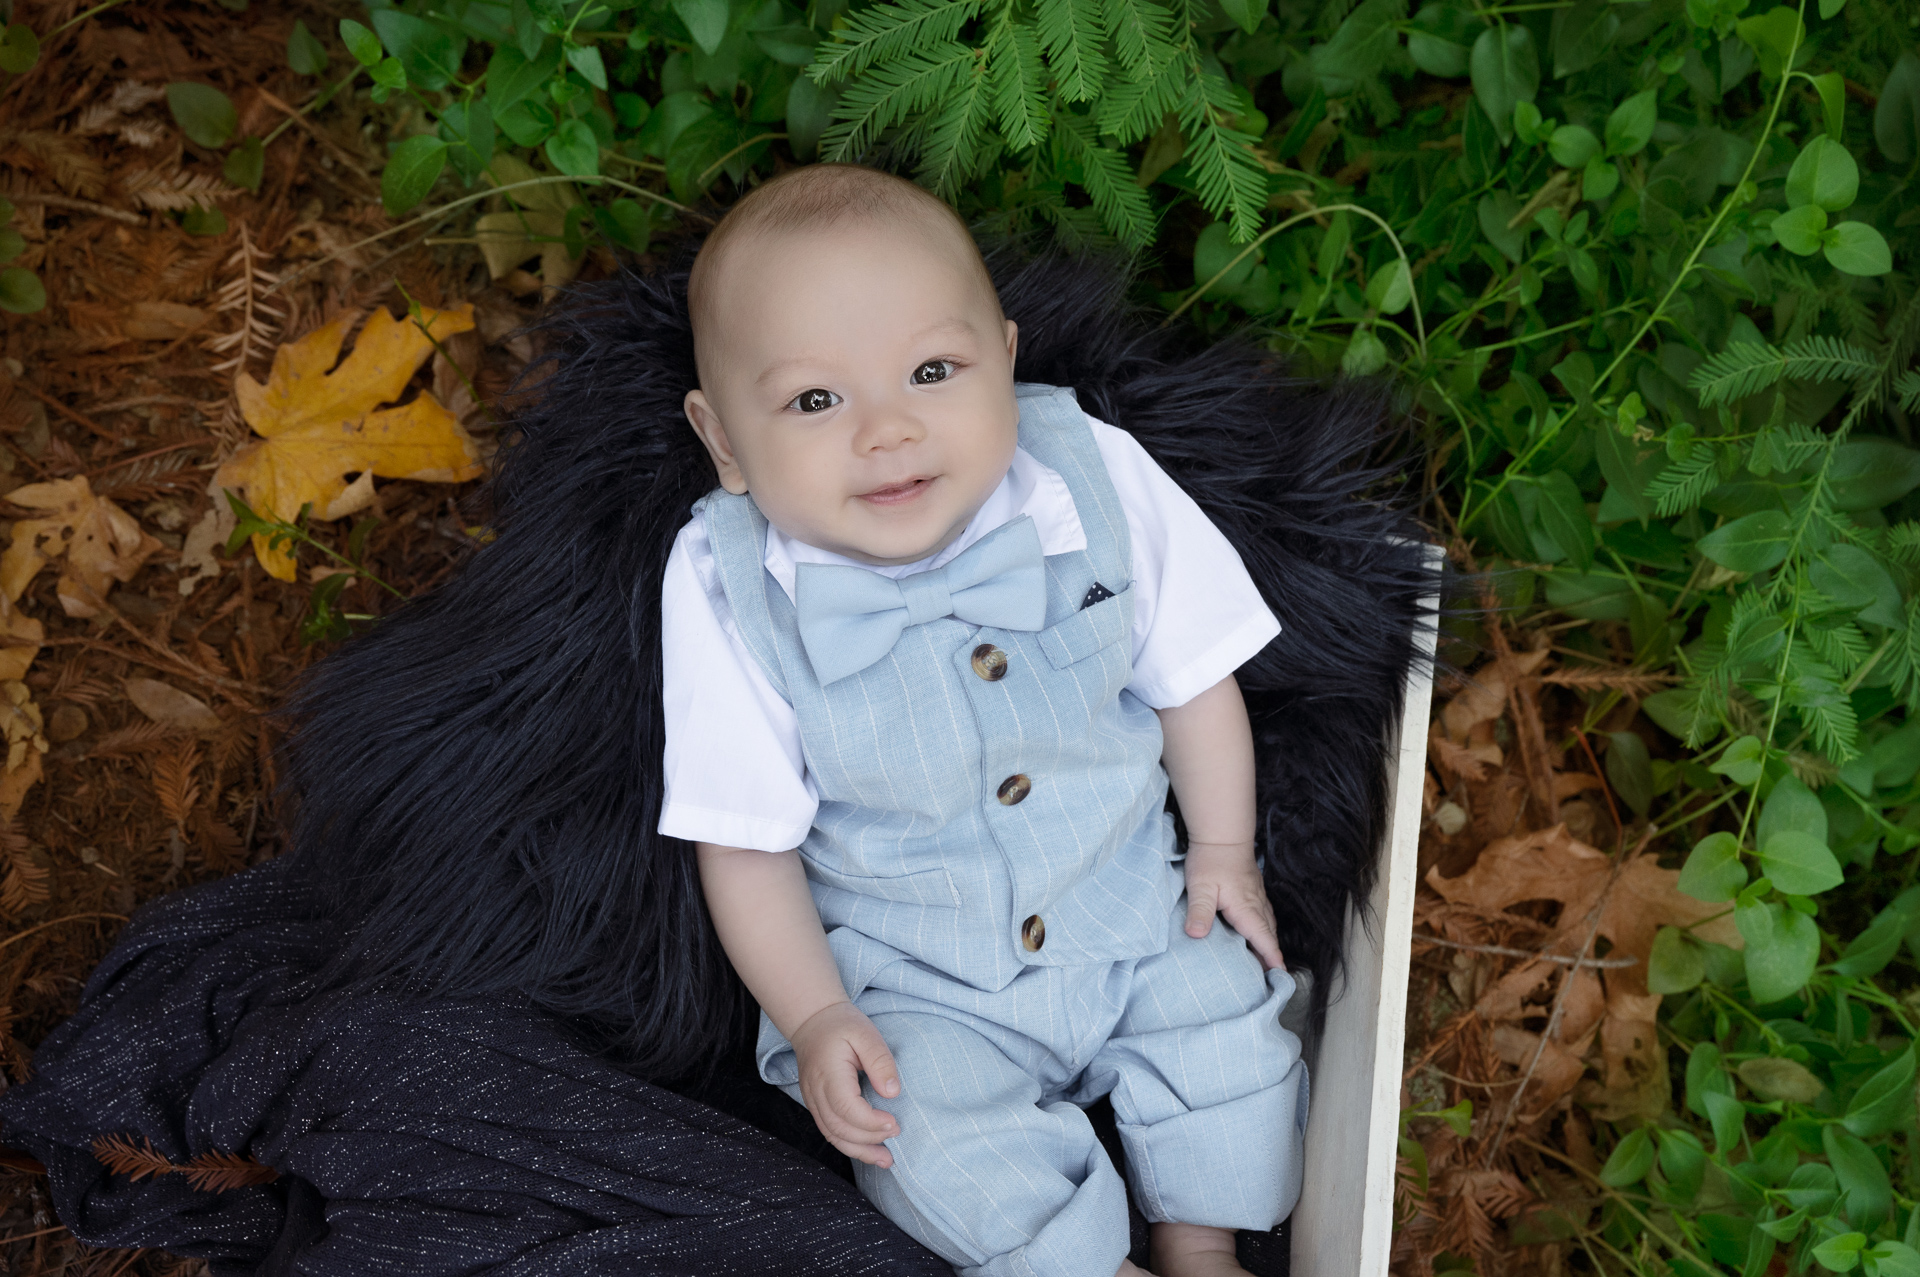 baby boy wearing light blue suit outfit posing outdoors